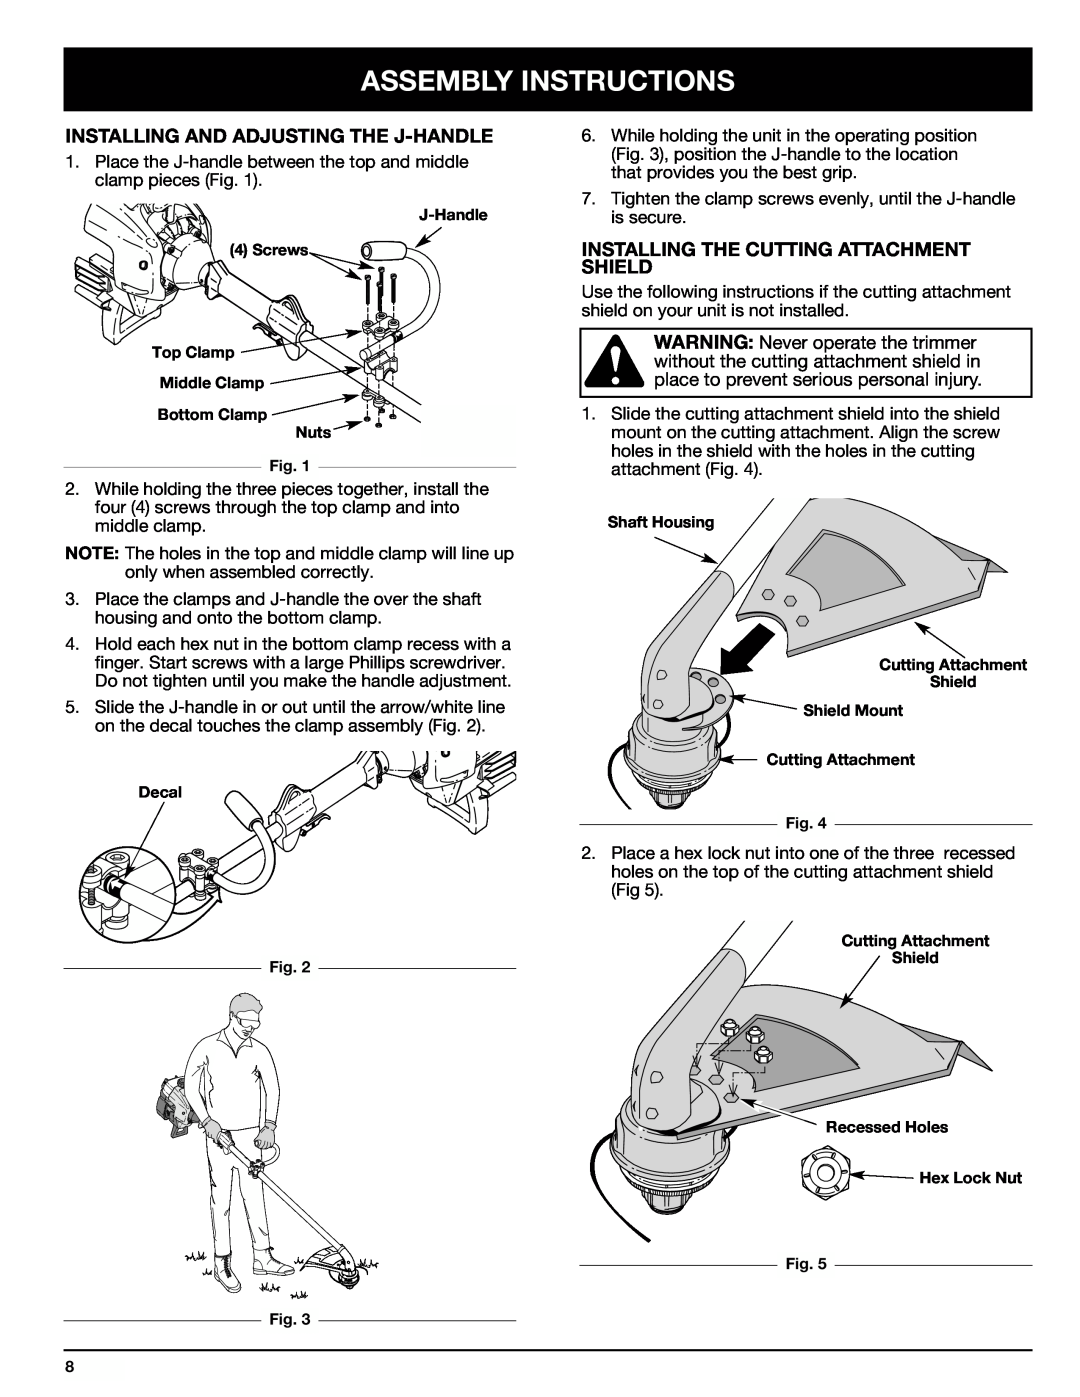 Ryobi 767rj manual Assembly Instructions, Installing And Adjusting The J-Handle, Installing The Cutting Attachment Shield 